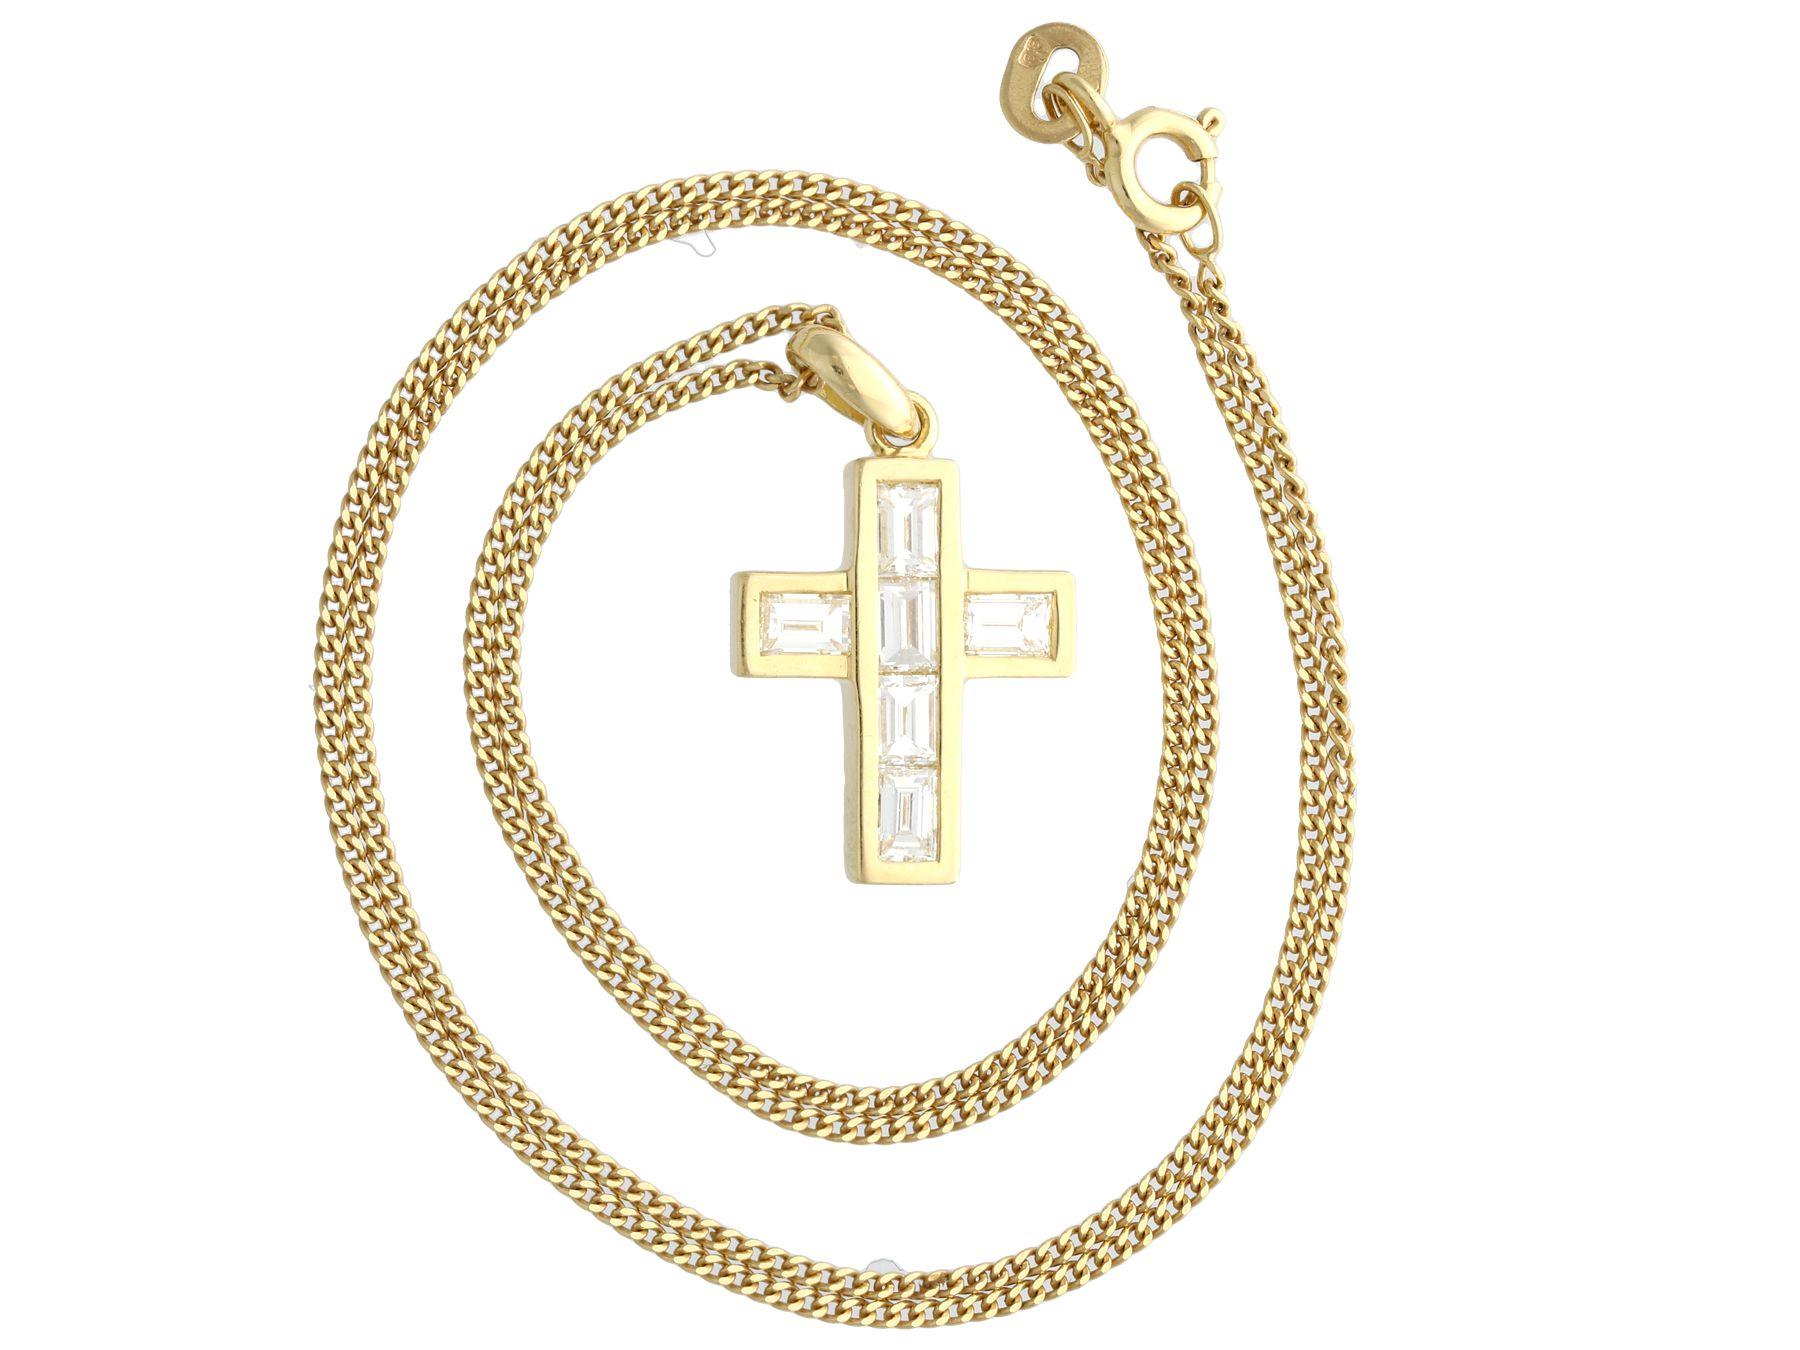 A fine and impressive contemporary 1.02 carat diamond and 18k yellow gold cross pendant; part of our diverse diamond jewellery and estate jewelry collections.

This fine and impressive contemporary diamond pendant has been crafted in 18k yellow